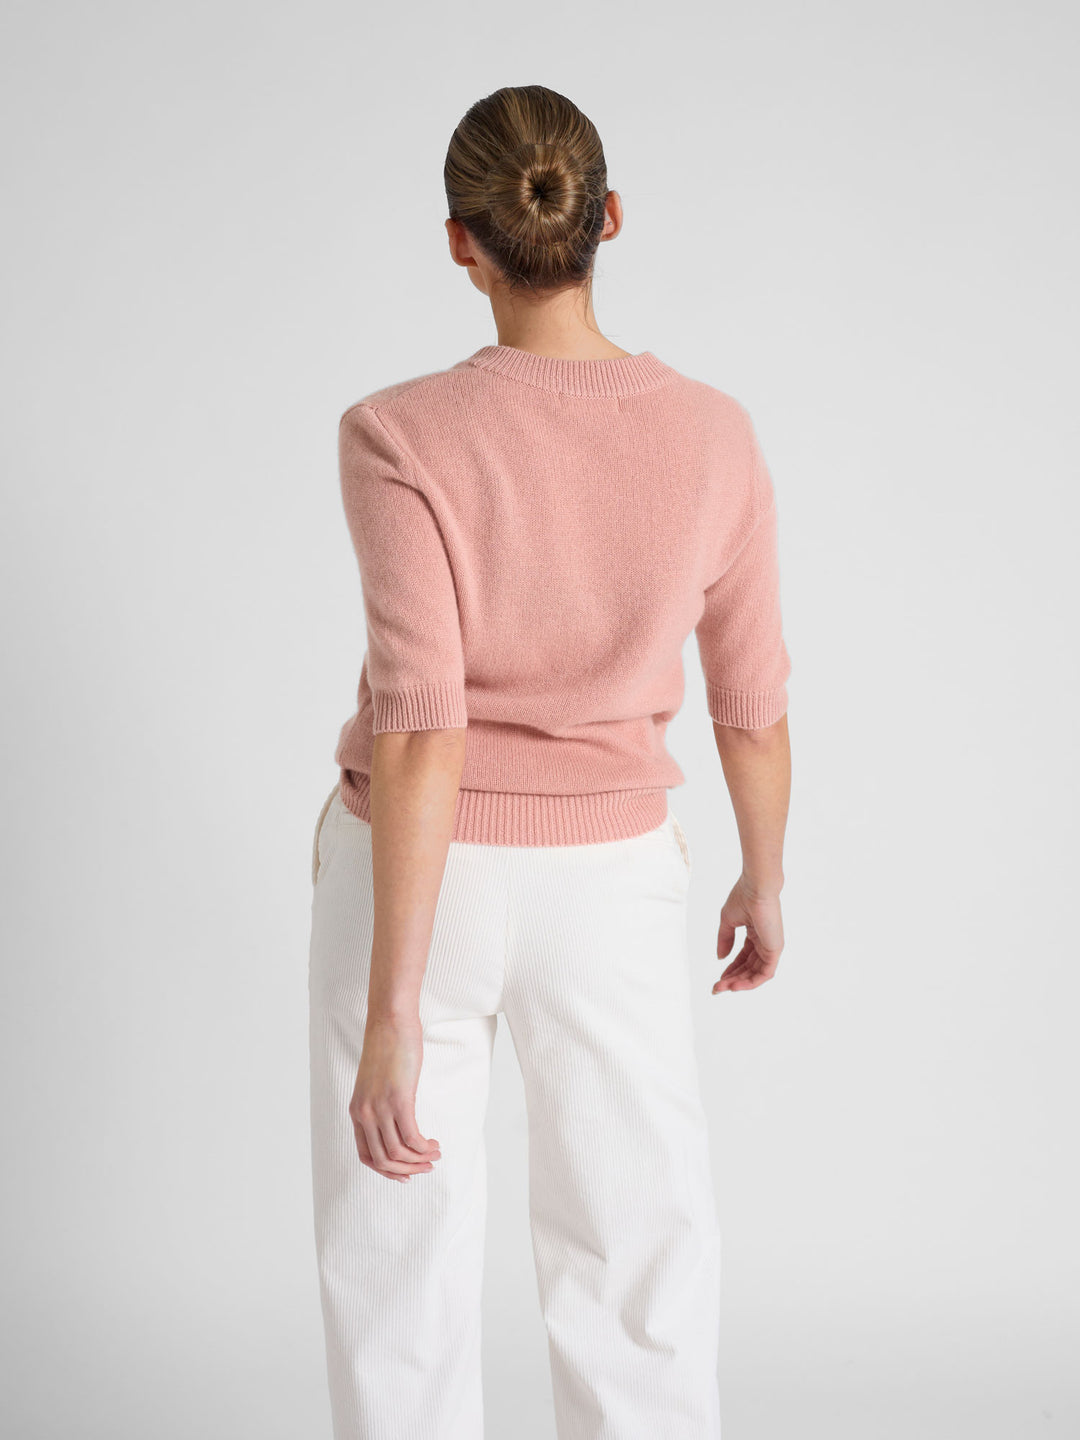 Short sleeved cashmere sweater "Sofia" in 100% pure cashmere. Scandinavian design by Kashmina. Color: Peachy Pink.